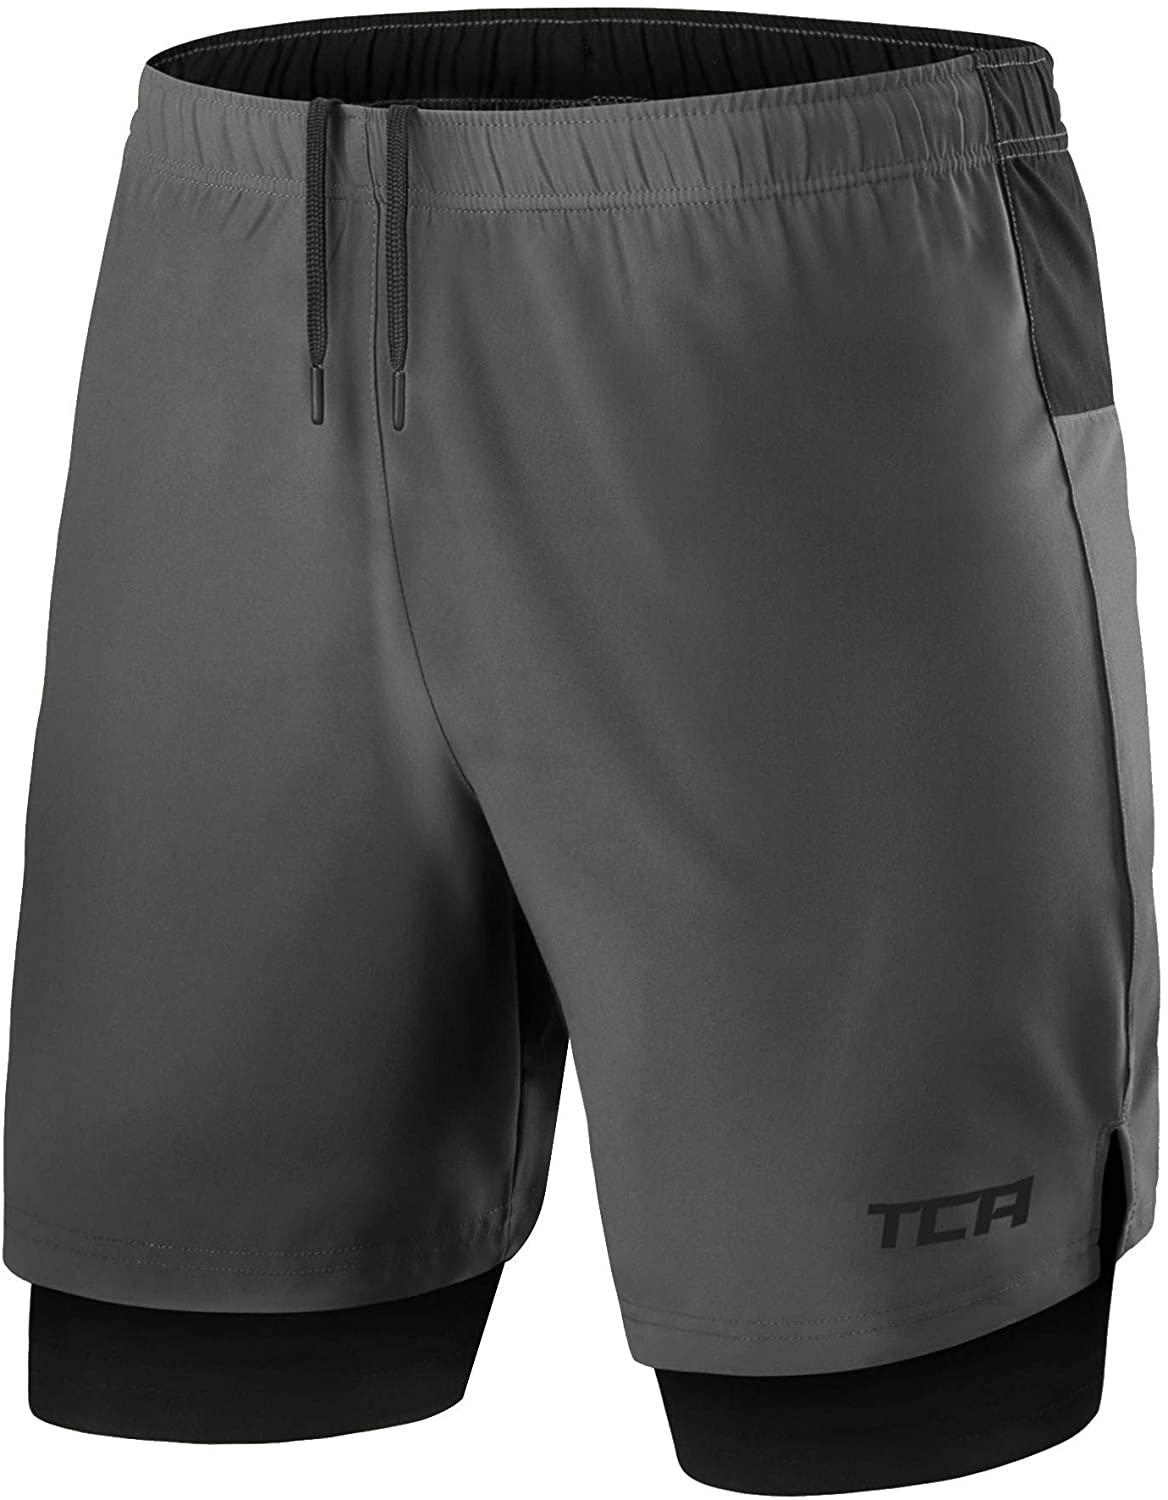 TCA Men's Ultra 2 in 1 Running/Gym Shorts with Zipped Pocket